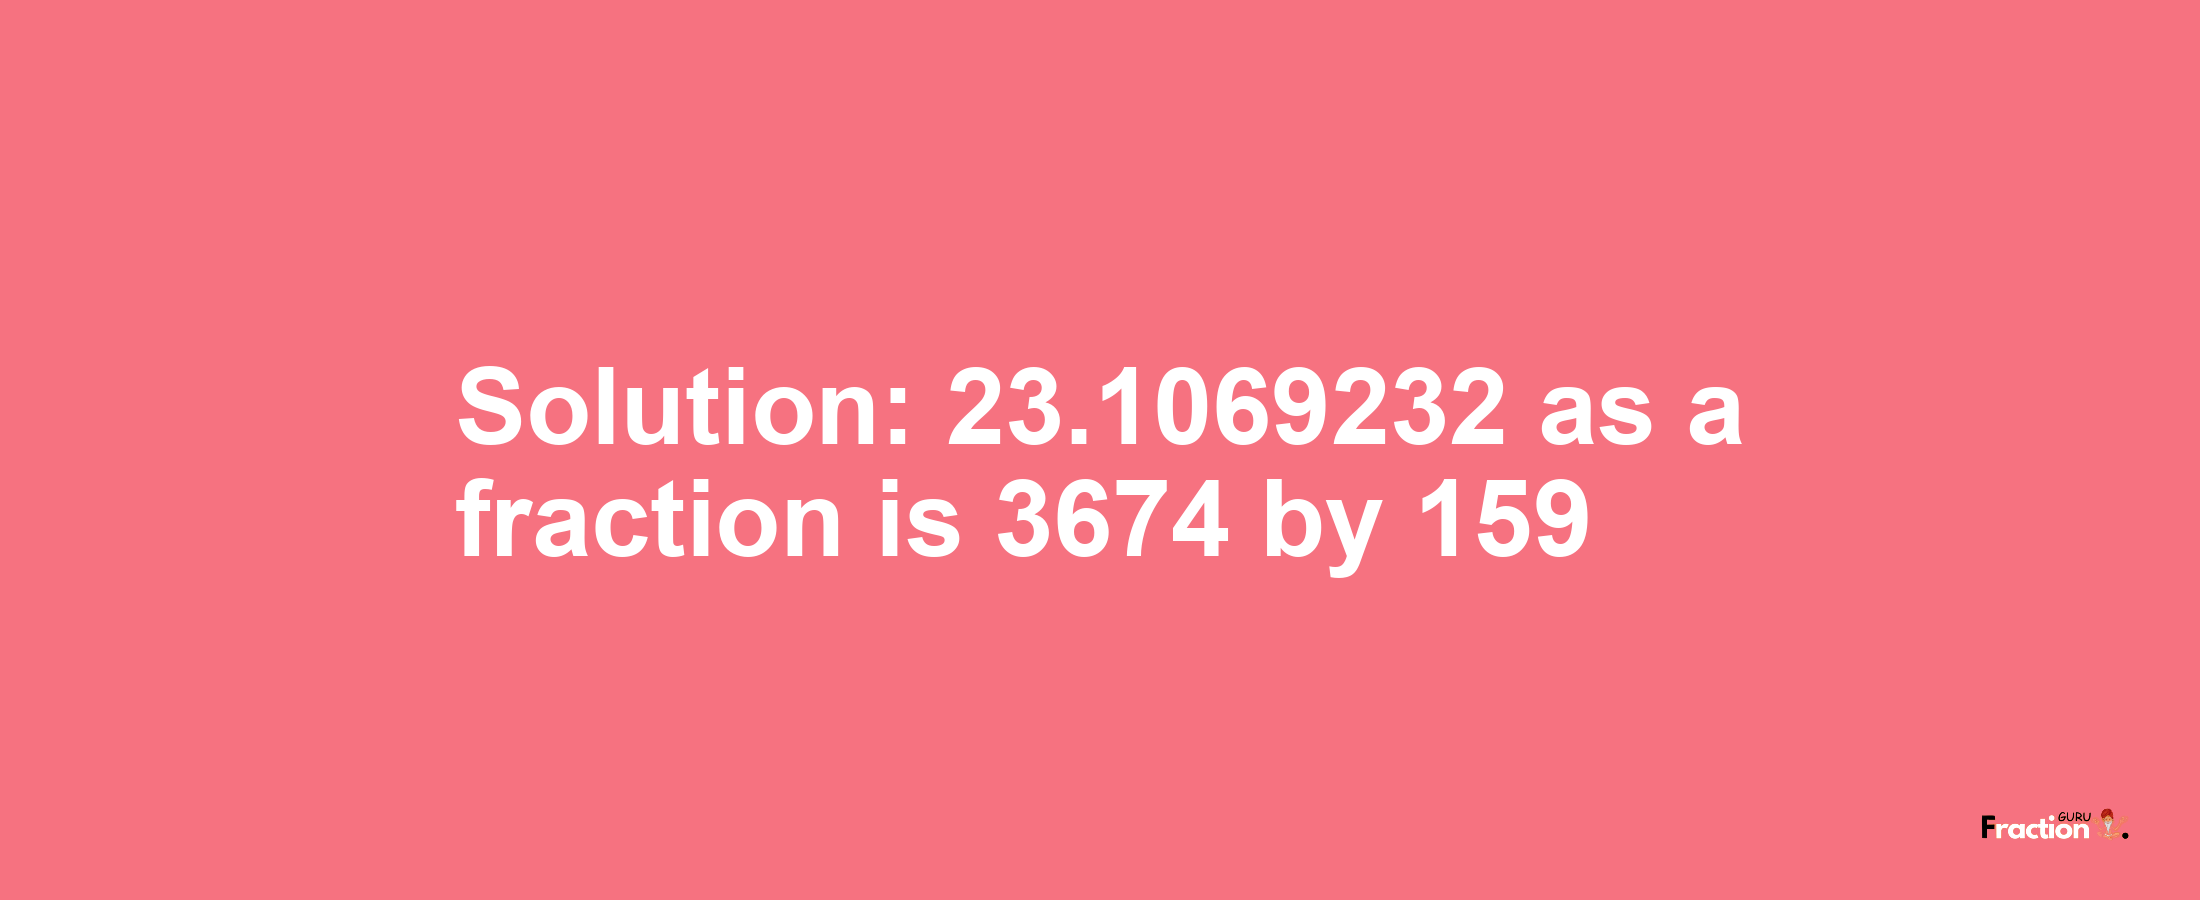 Solution:23.1069232 as a fraction is 3674/159